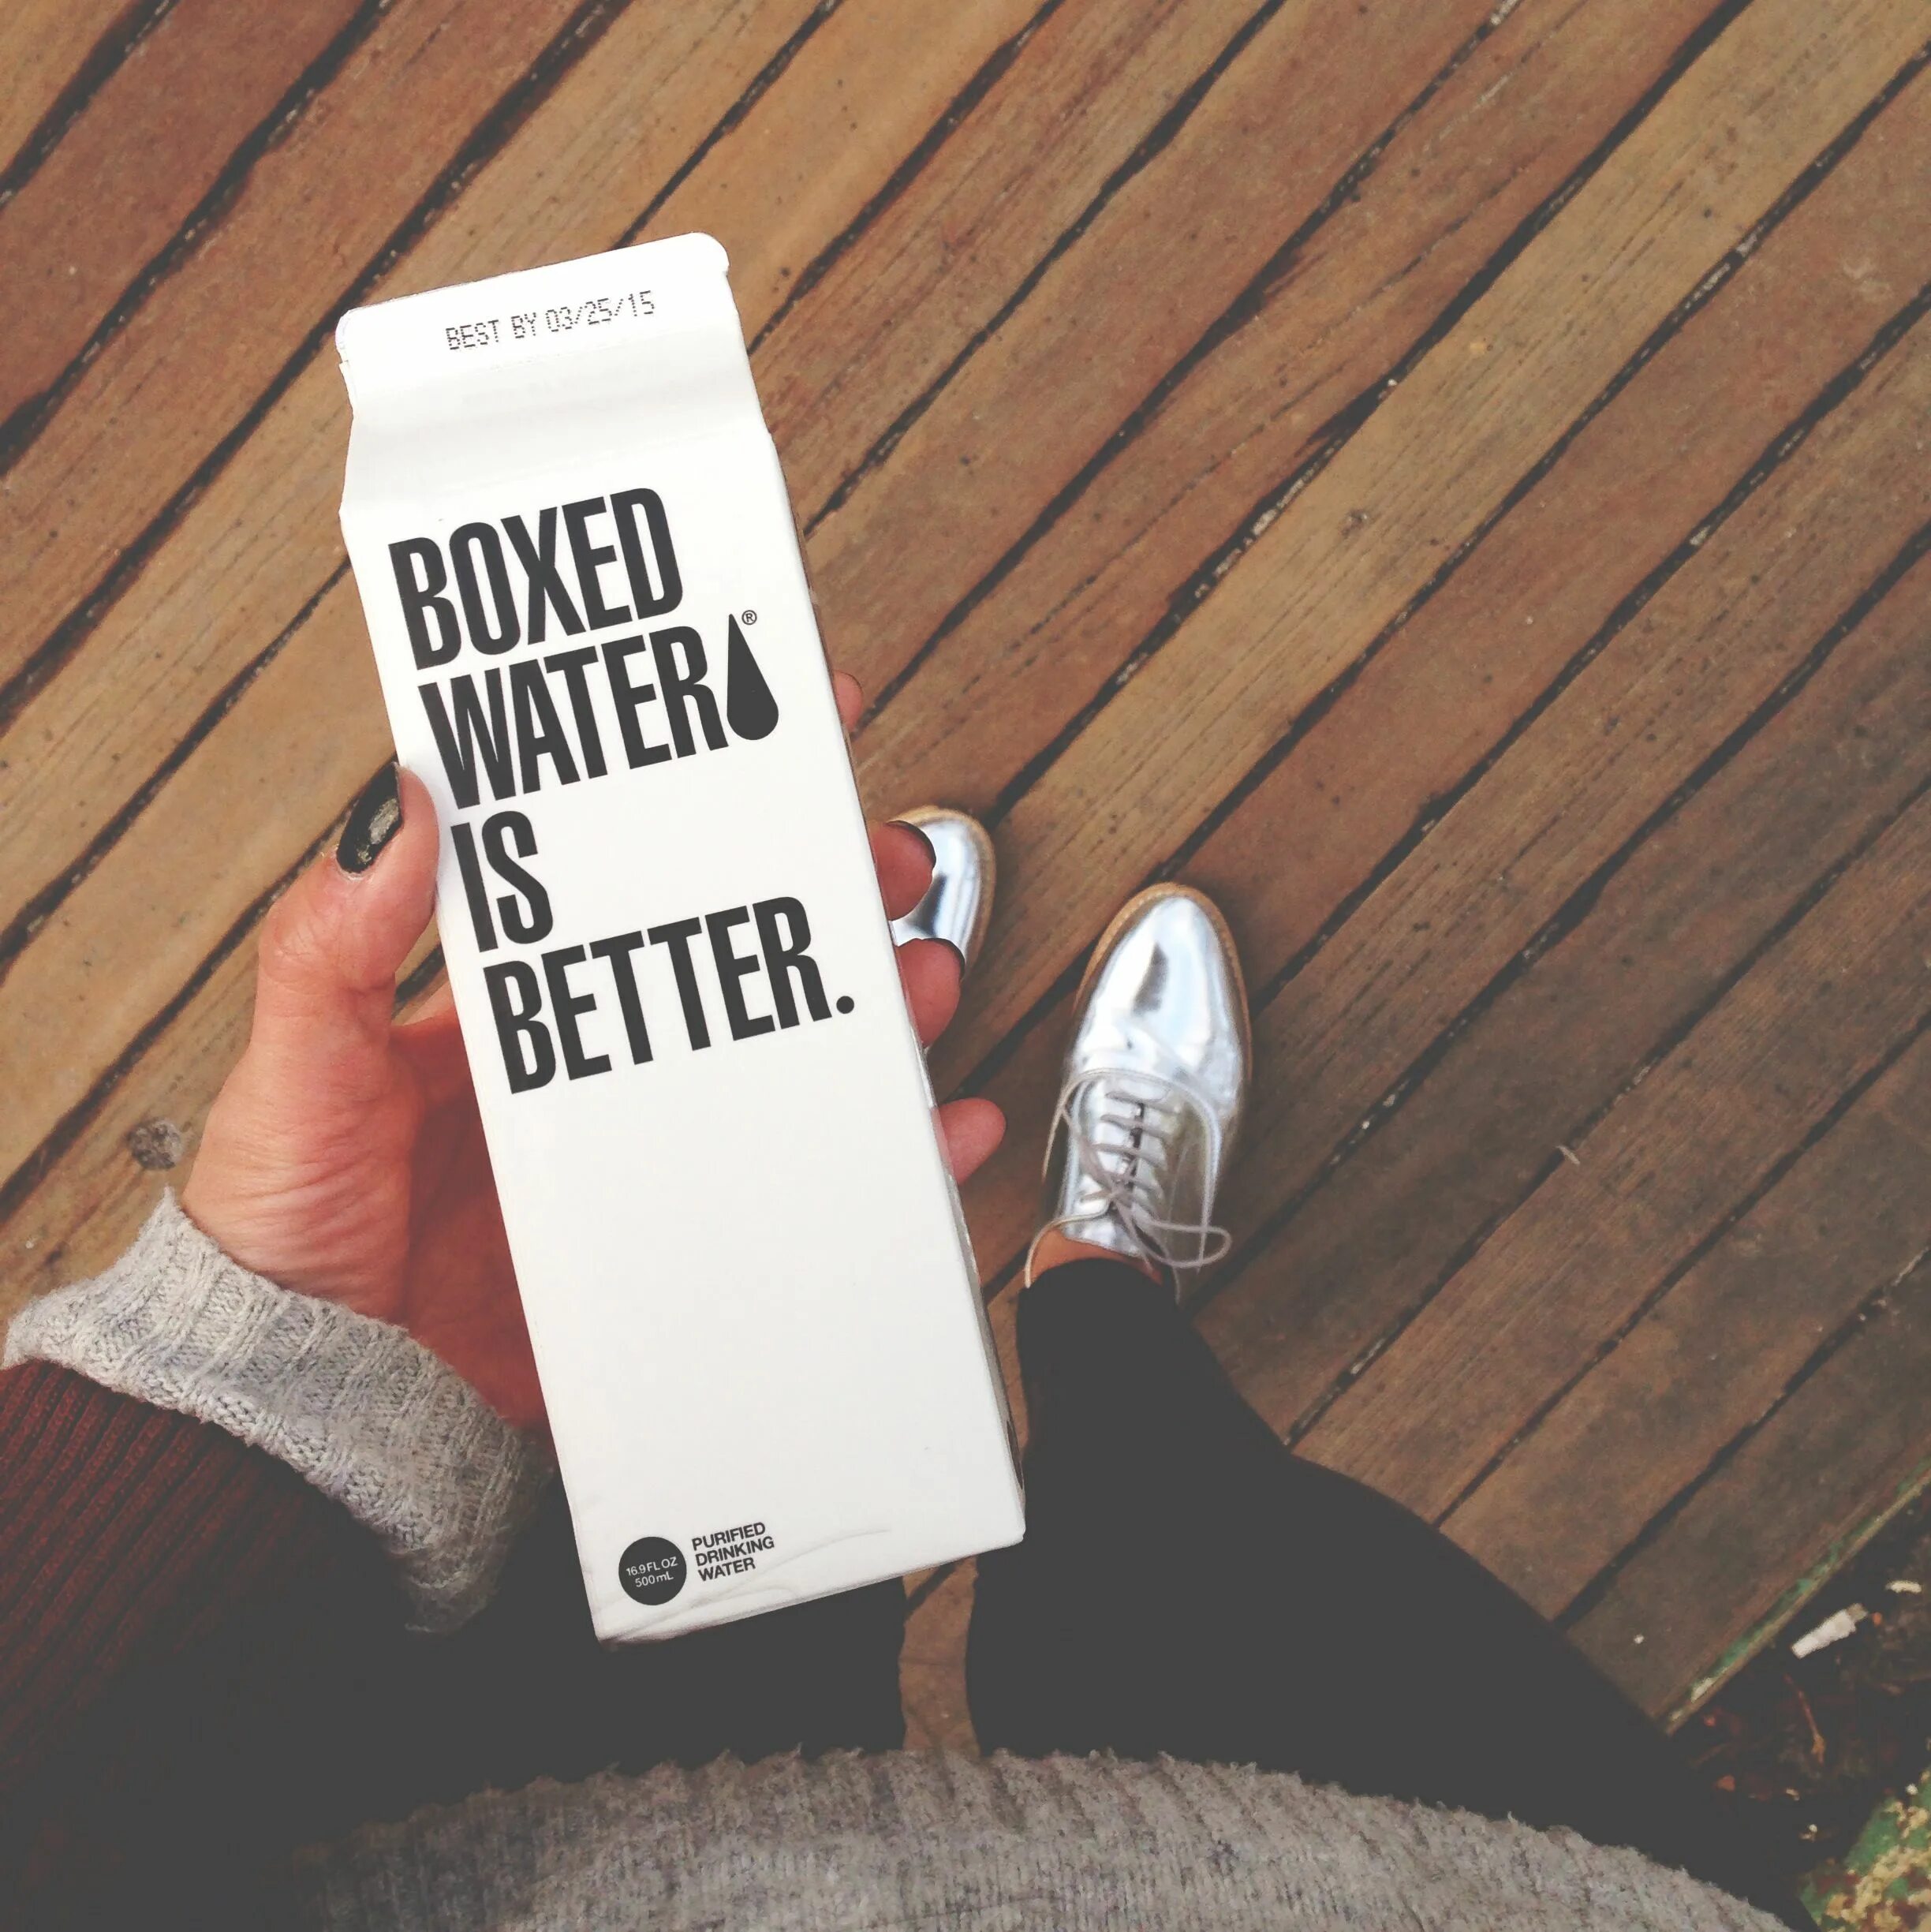 Water is better. Water Box. Boxed Water is better. Well being бокс. I good отзывы